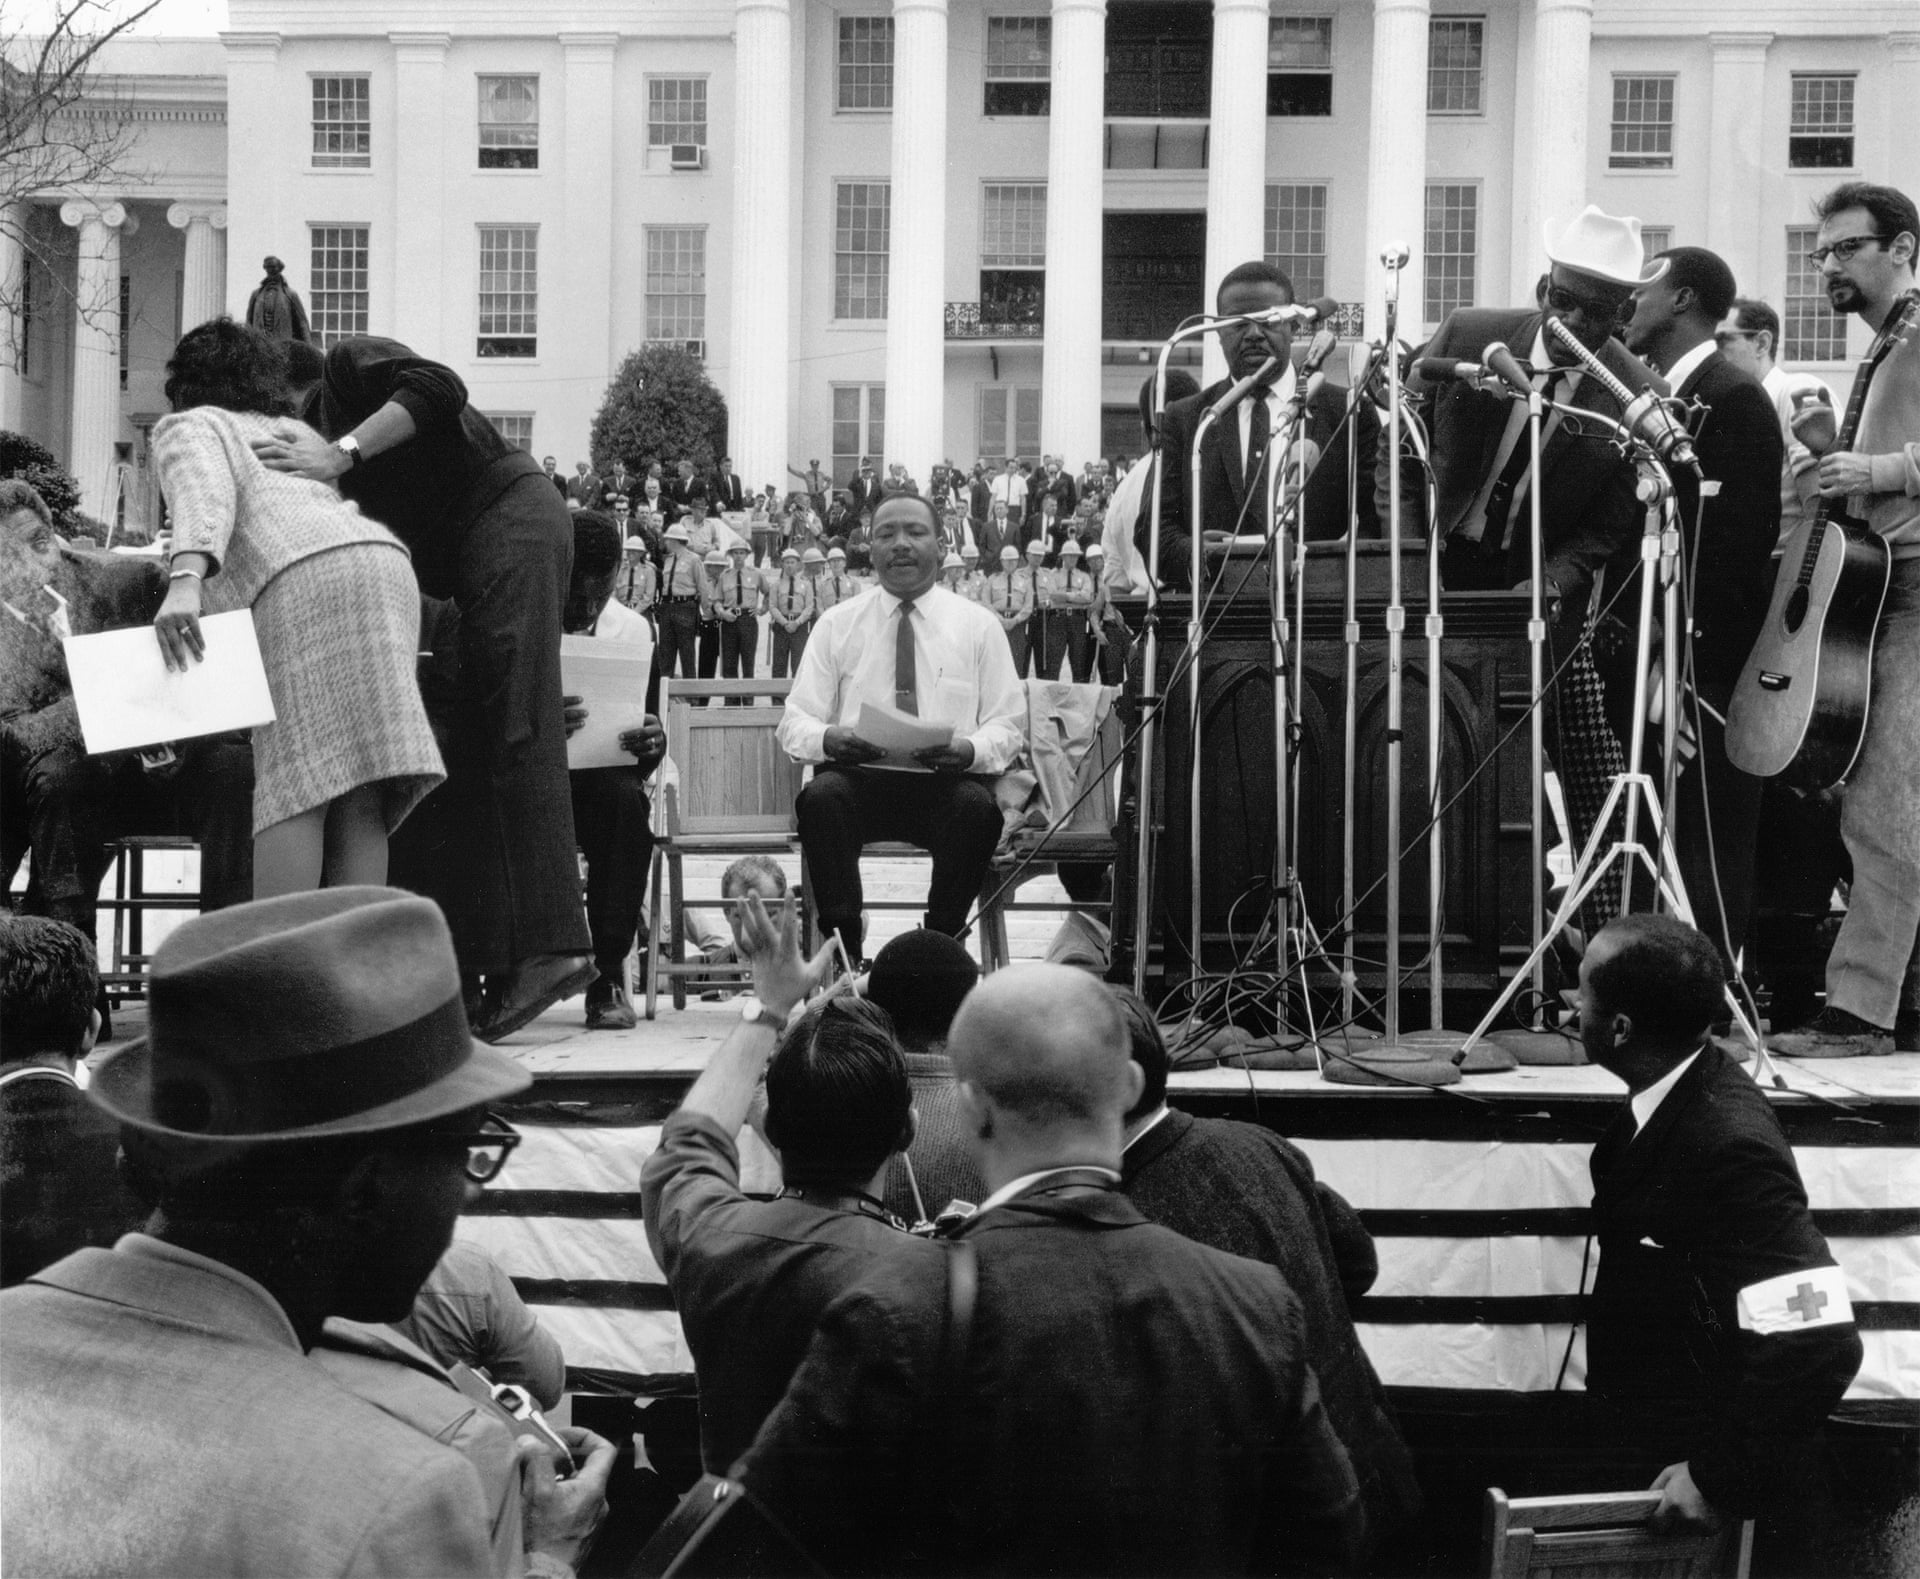 Martin Luther King Jr waiting to be introduced at the Alabama Capitol after leading the 54-mile march from Selma to Montgomery, 1965